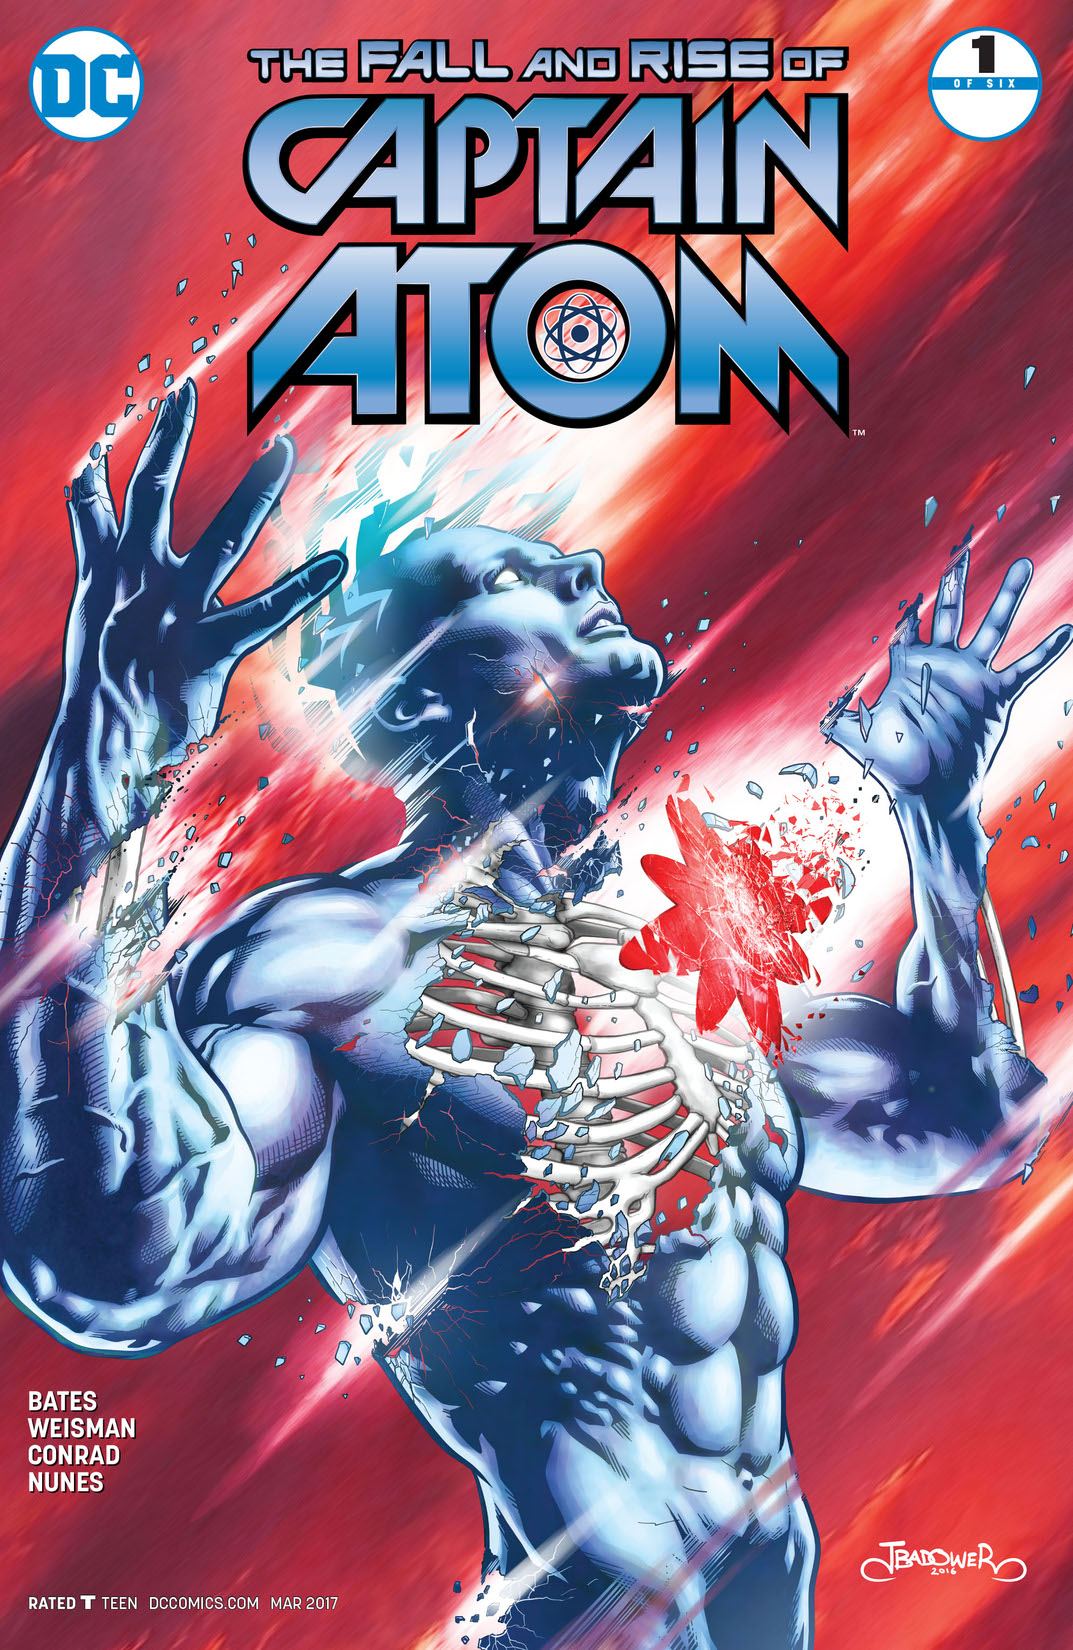 The Fall and Rise of Captain Atom #1 preview images